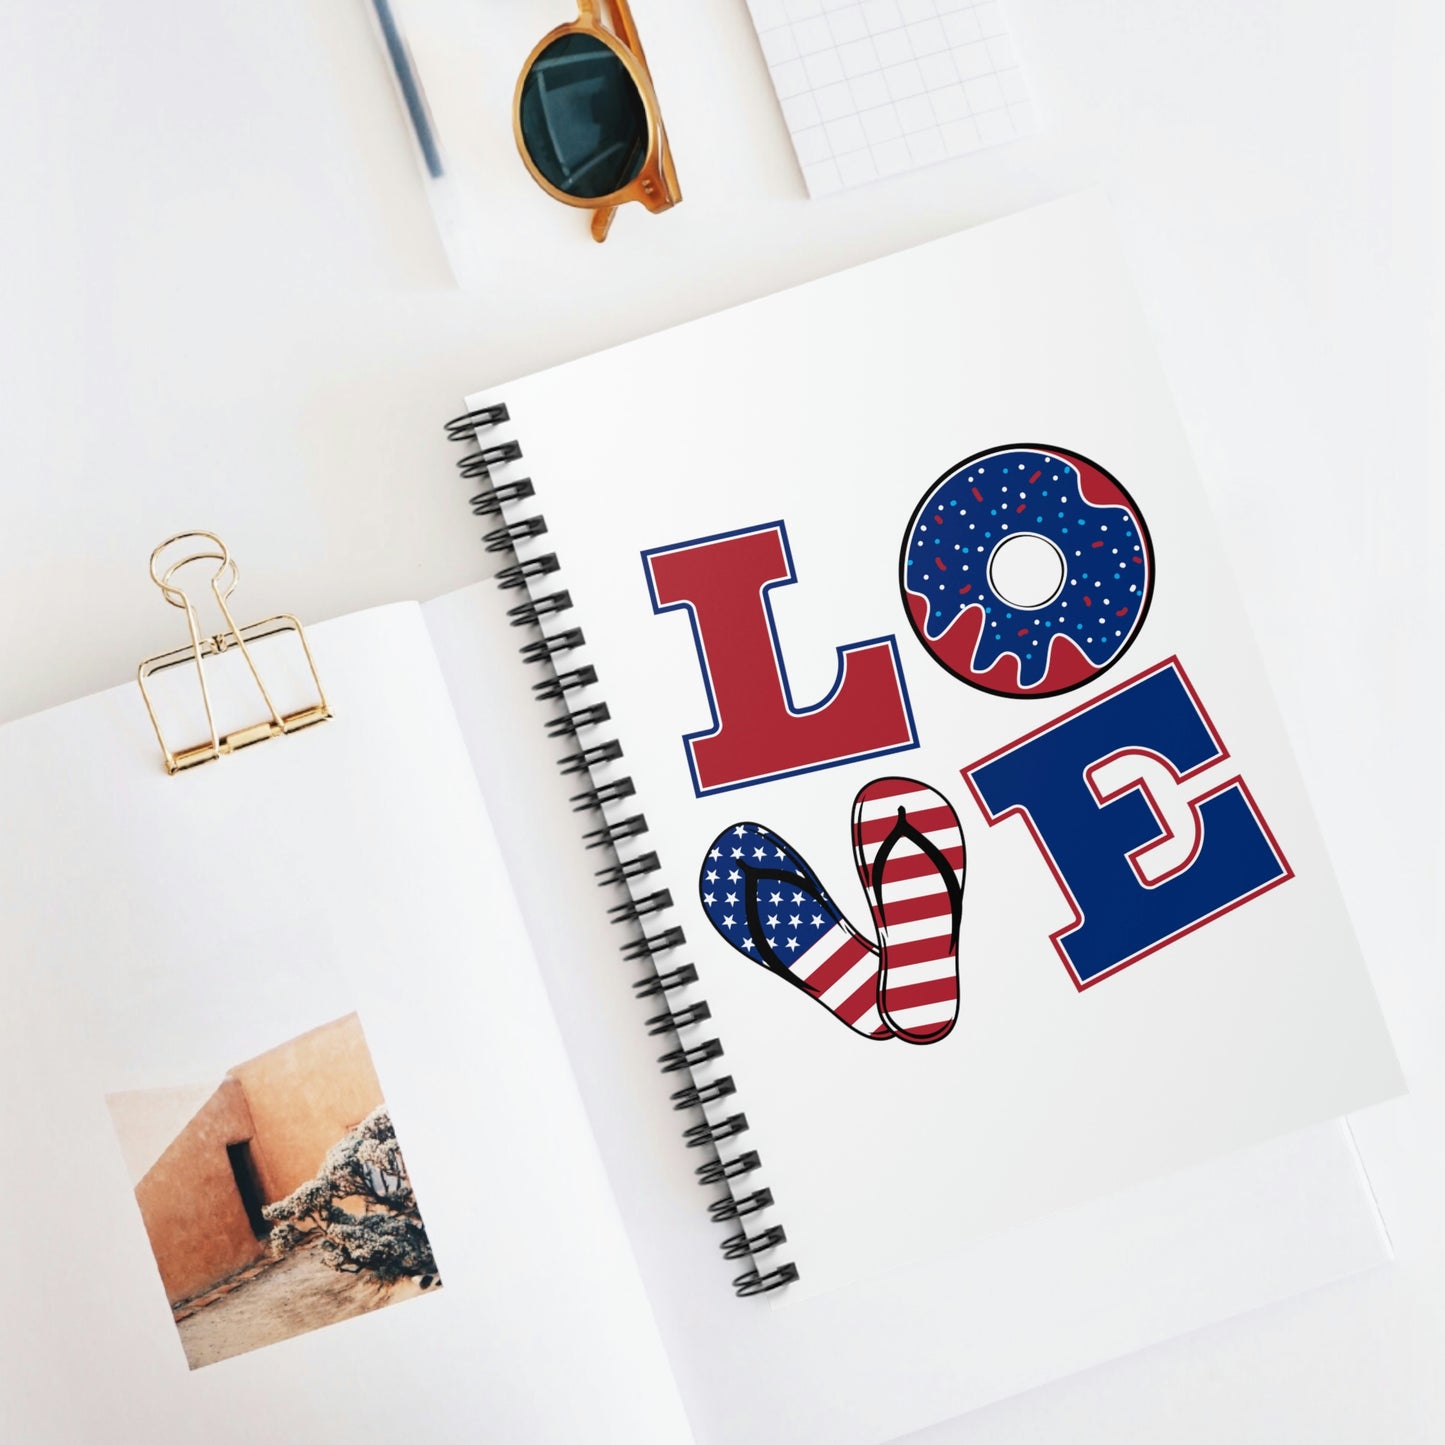 LOVE - Red White Blue Pattern Letters On A Field Of White Patriotic - Spiral Notebook - Ruled Line